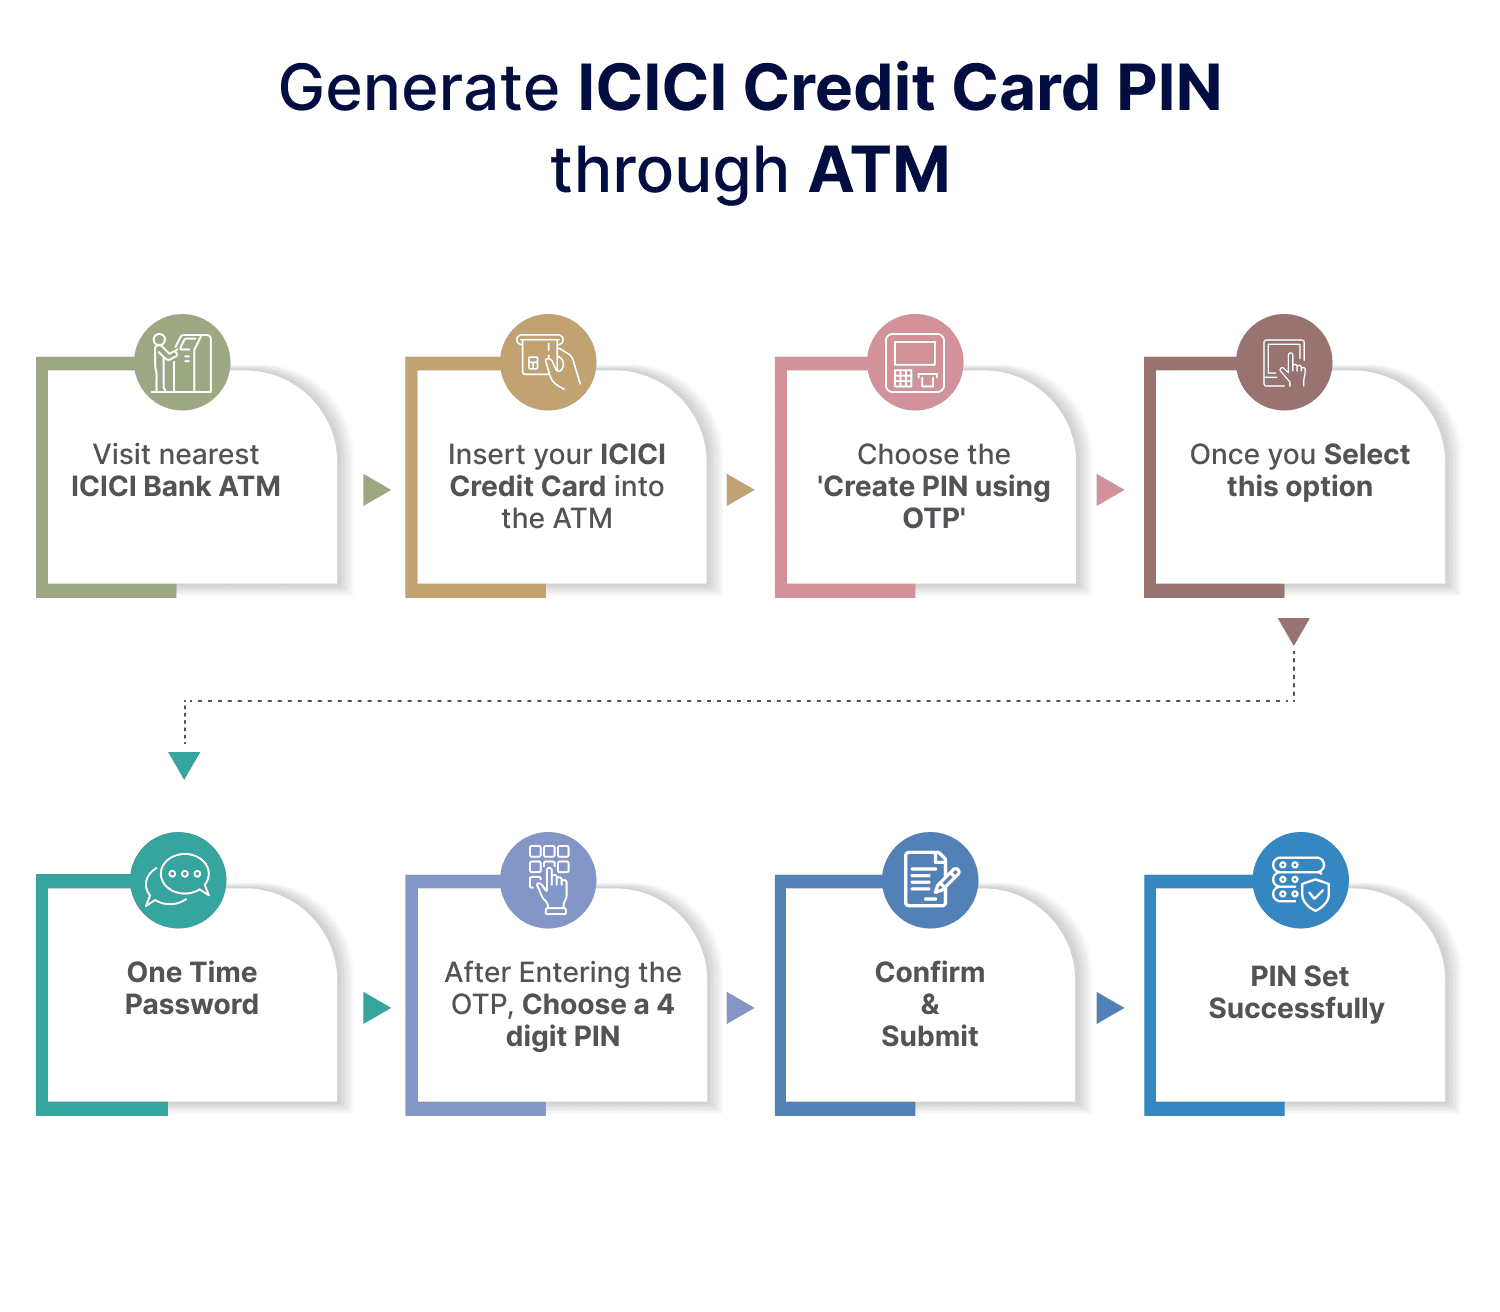 How to Generate ICICI Credit Card PIN through ATM